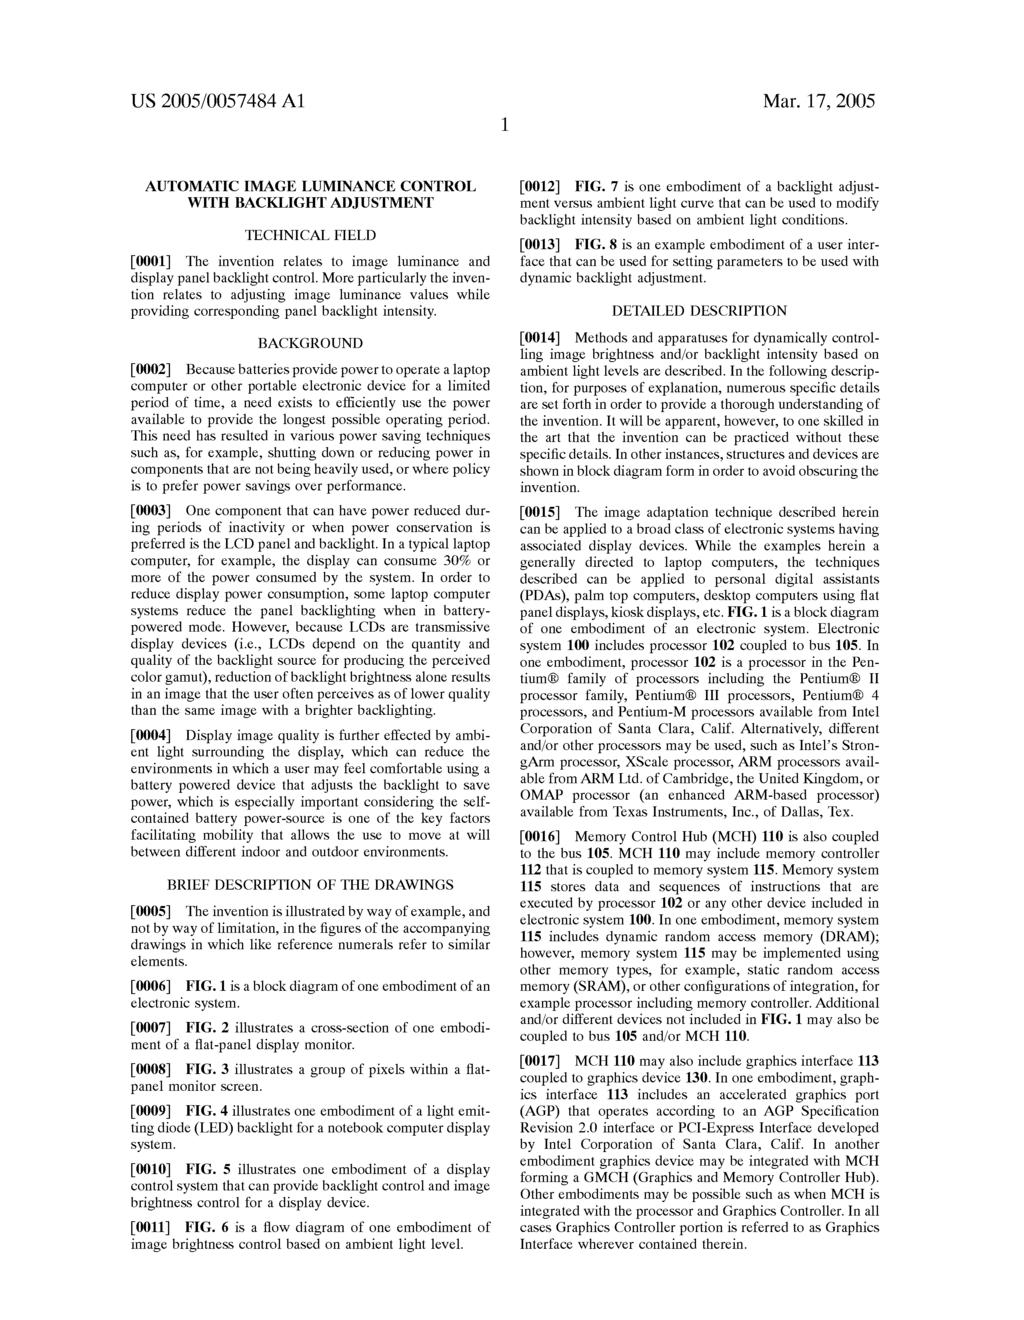 US 2005/0057484 A1 Mar. 17, 2005 AUTOMATIC IMAGE LUMINANCE CONTROL WITH BACKLIGHT ADJUSTMENT TECHNICAL FIELD 0001. The invention relates to image luminance and display panel backlight control.